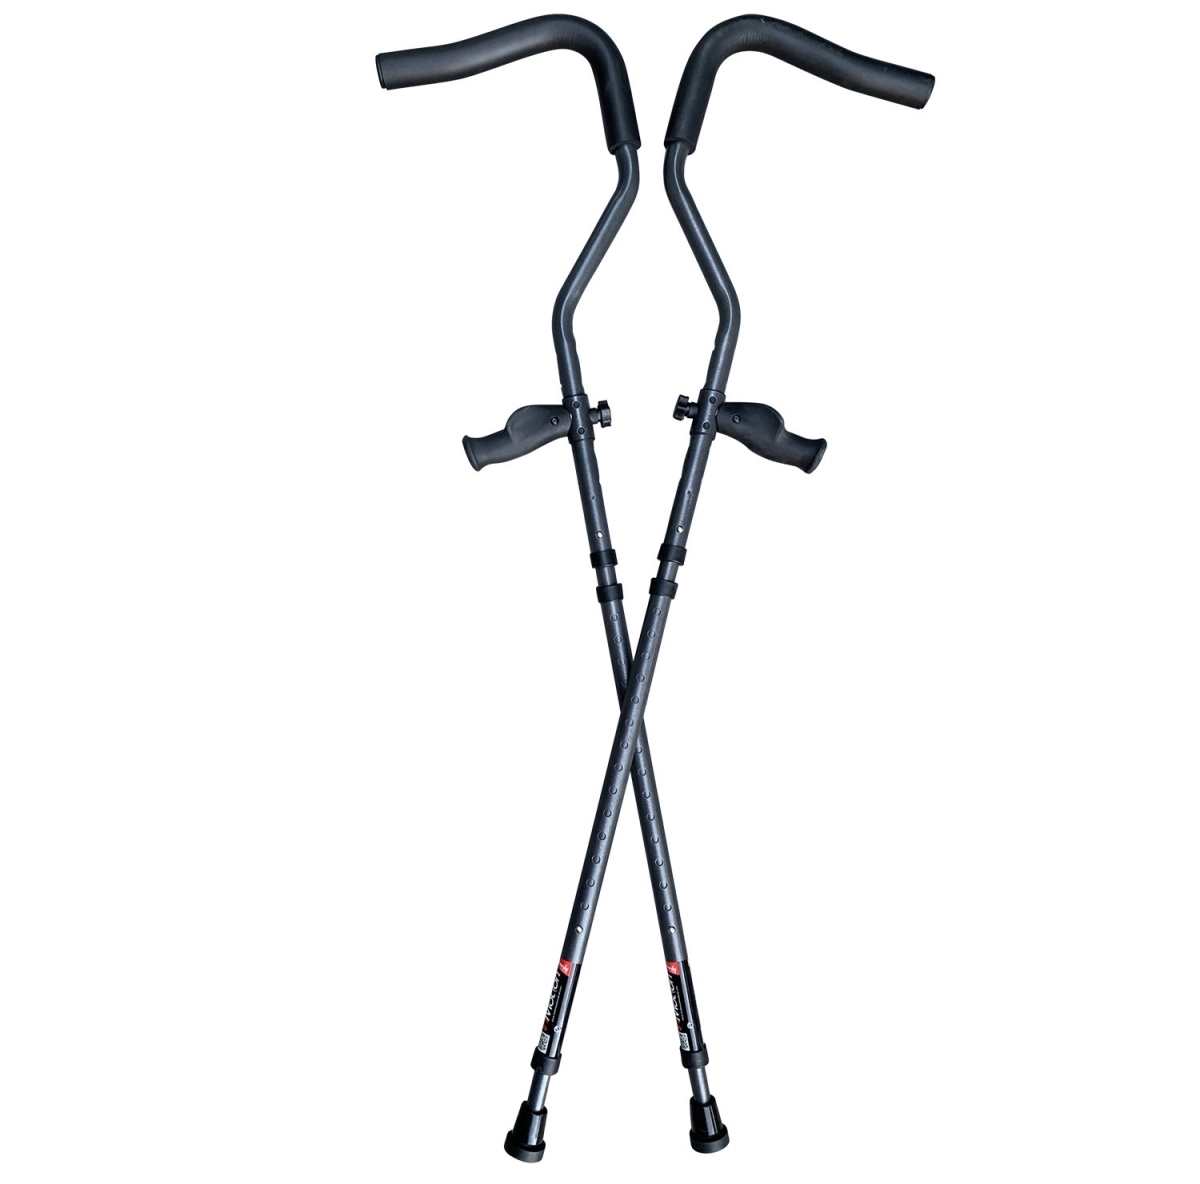 Millenial Medical 6500C In-Motion Pro Underarm Crutch, Charcoal Grey - Tall